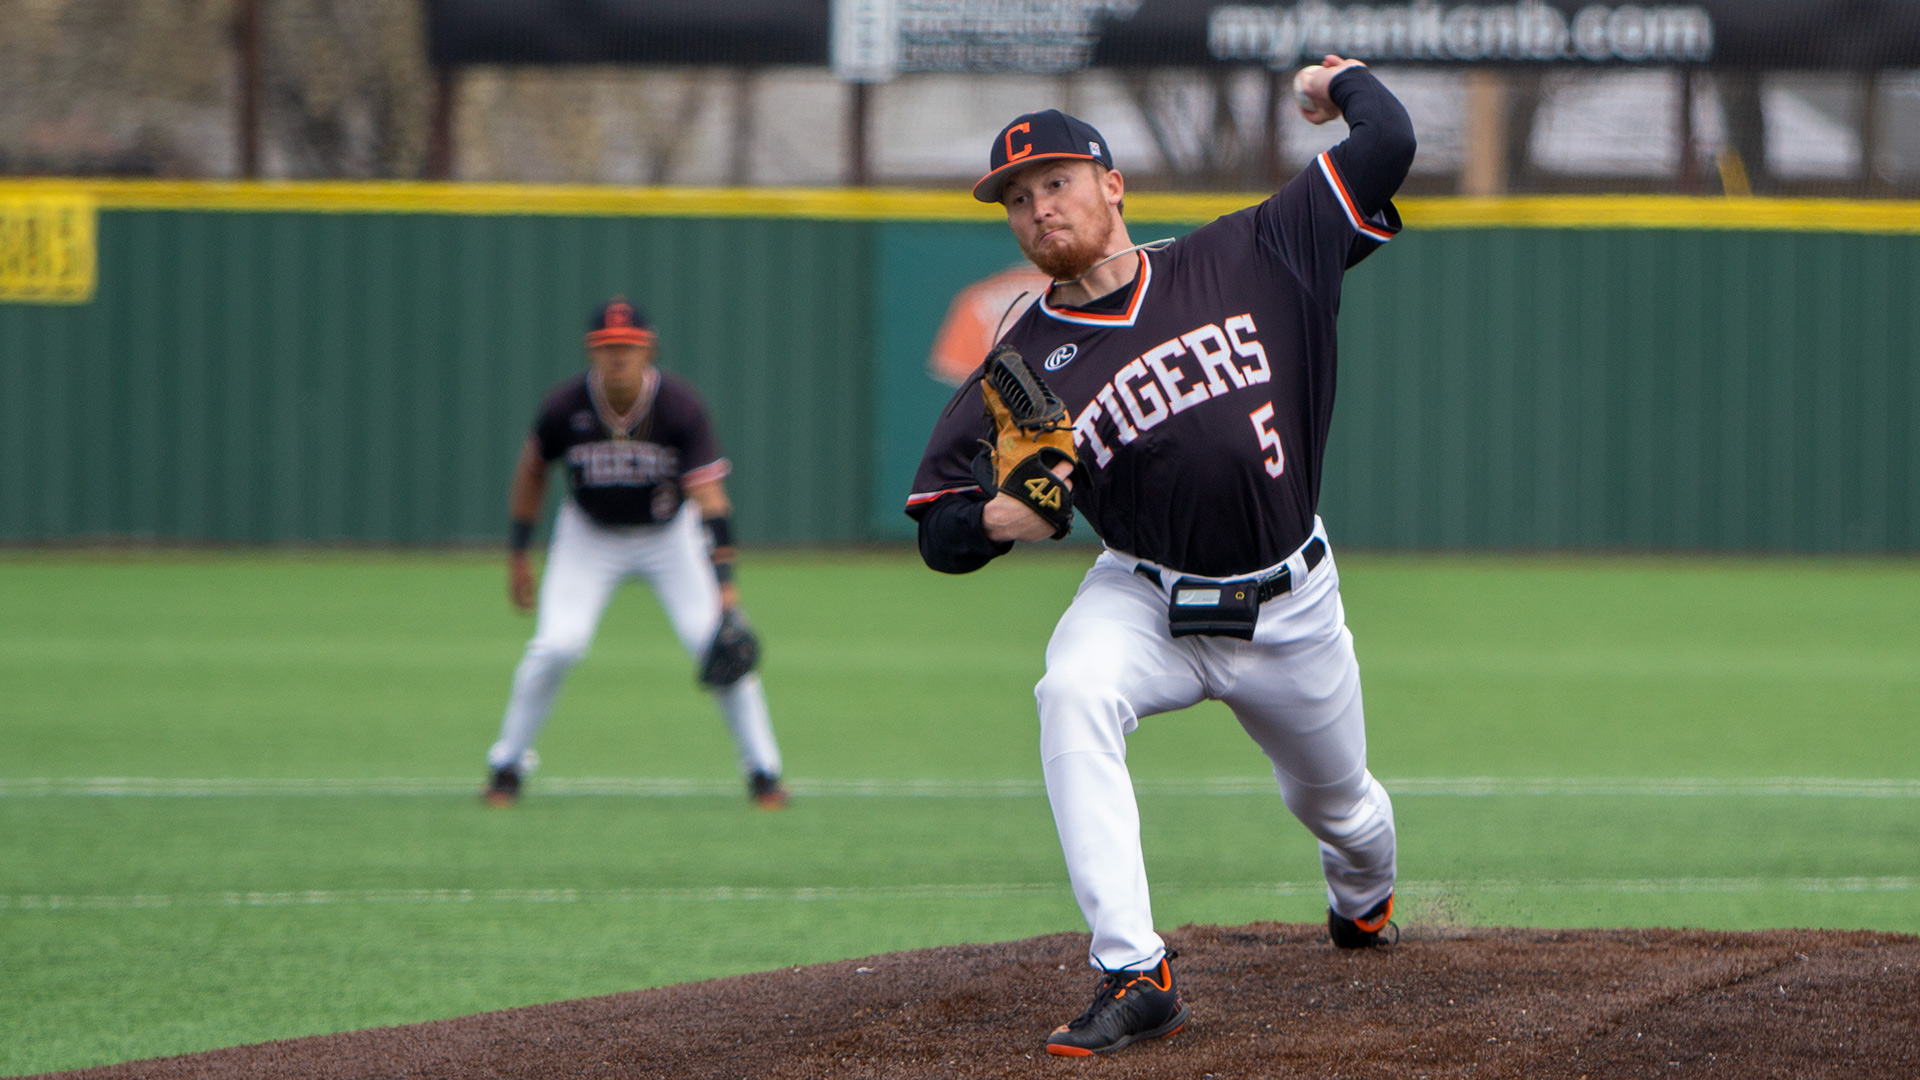 Tigers sweep a pair of home games, improve to 8-2 in Jayhawk Conference